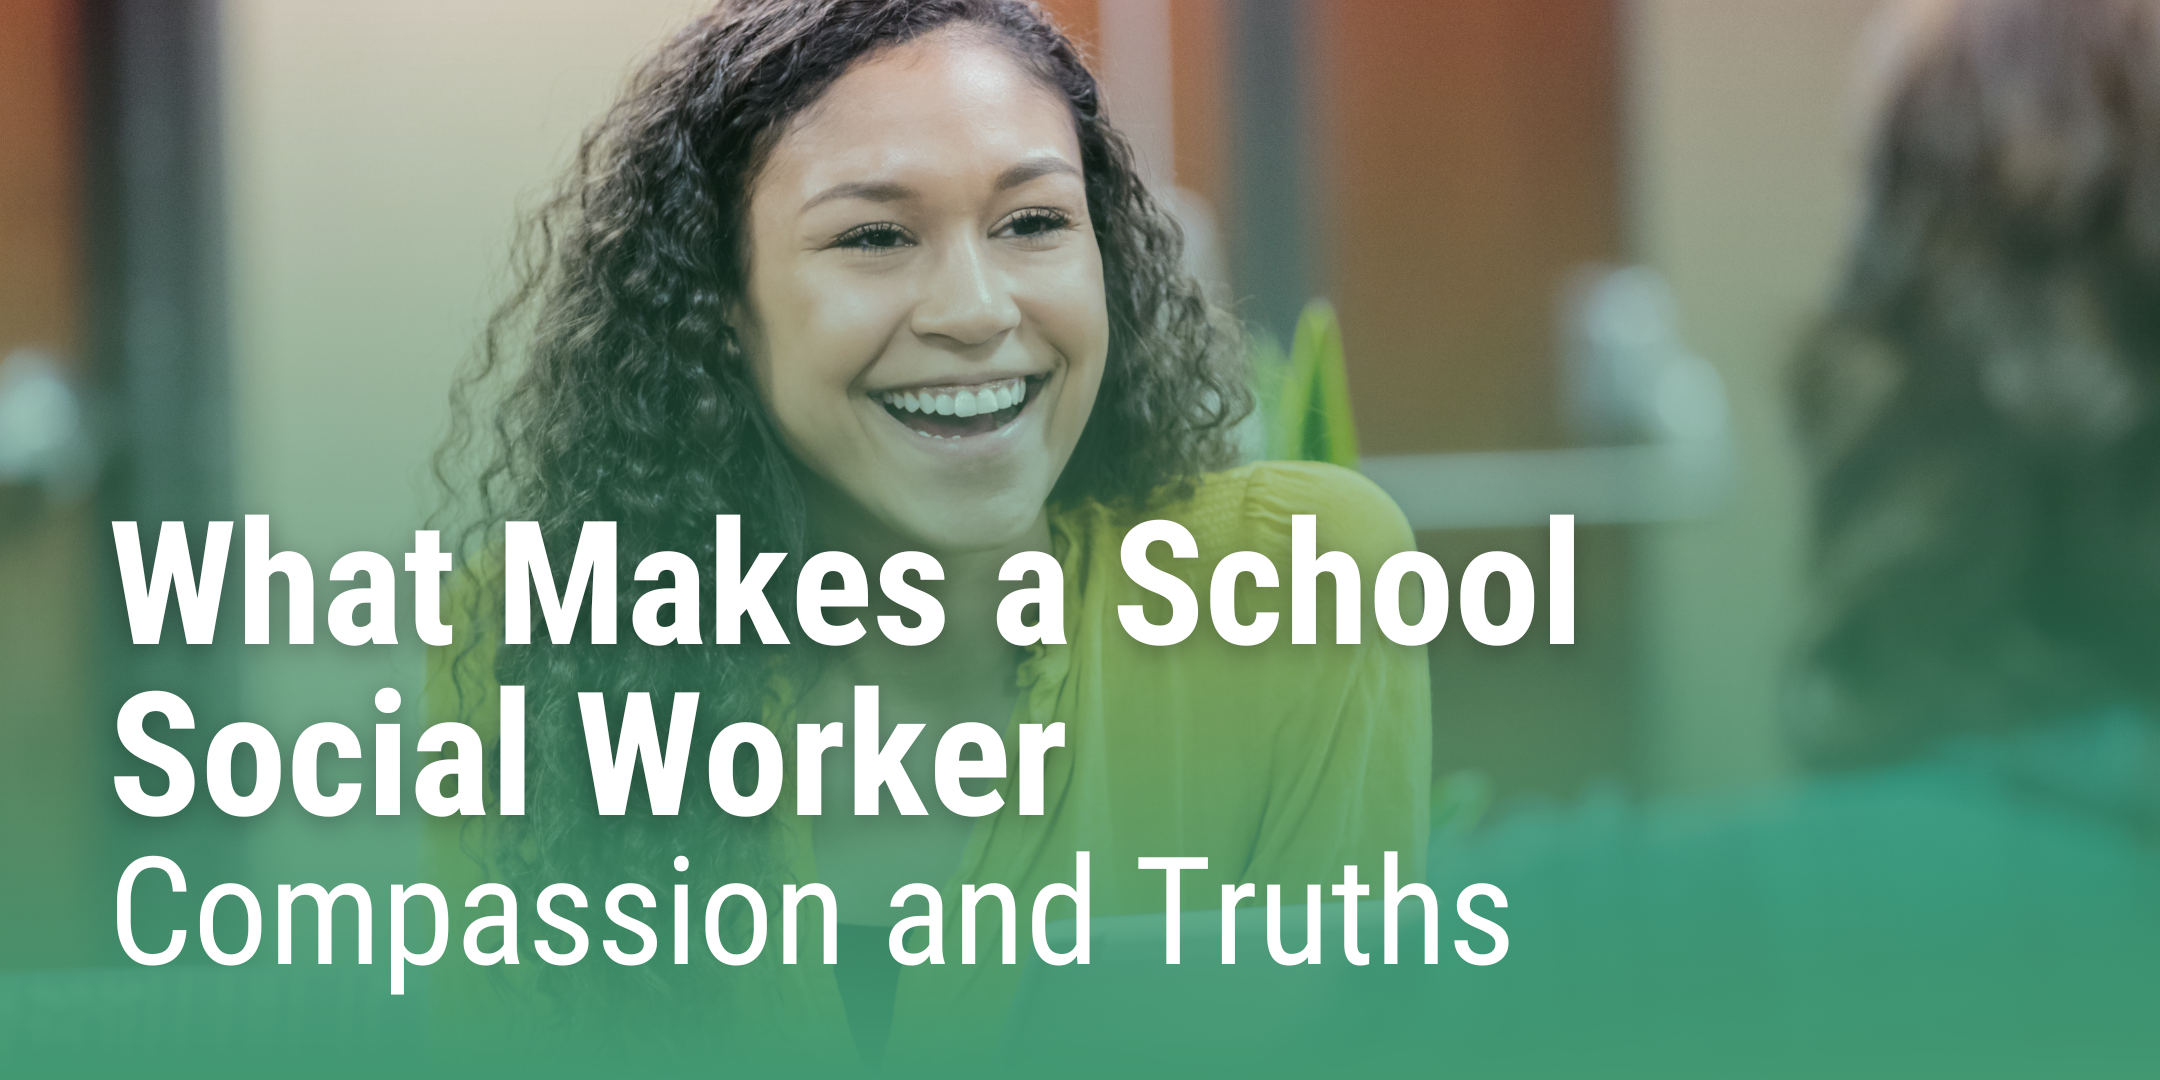 Banner displaying blog title "What Makes a School Social Worker: Compassion and Truths".